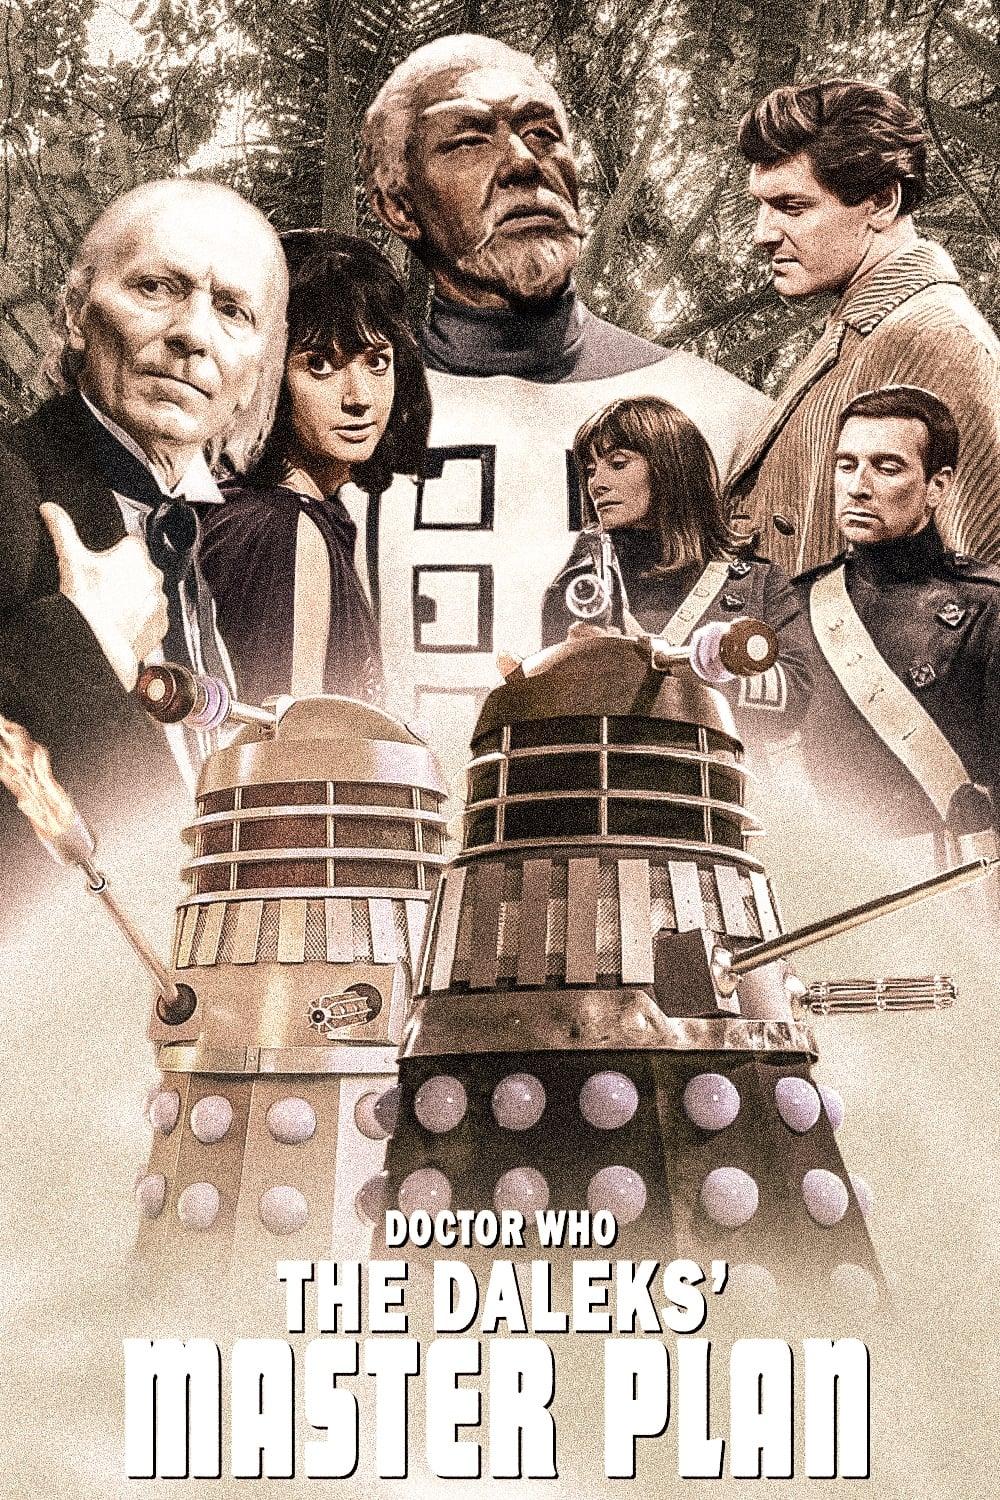 Doctor Who: The Daleks' Master Plan poster